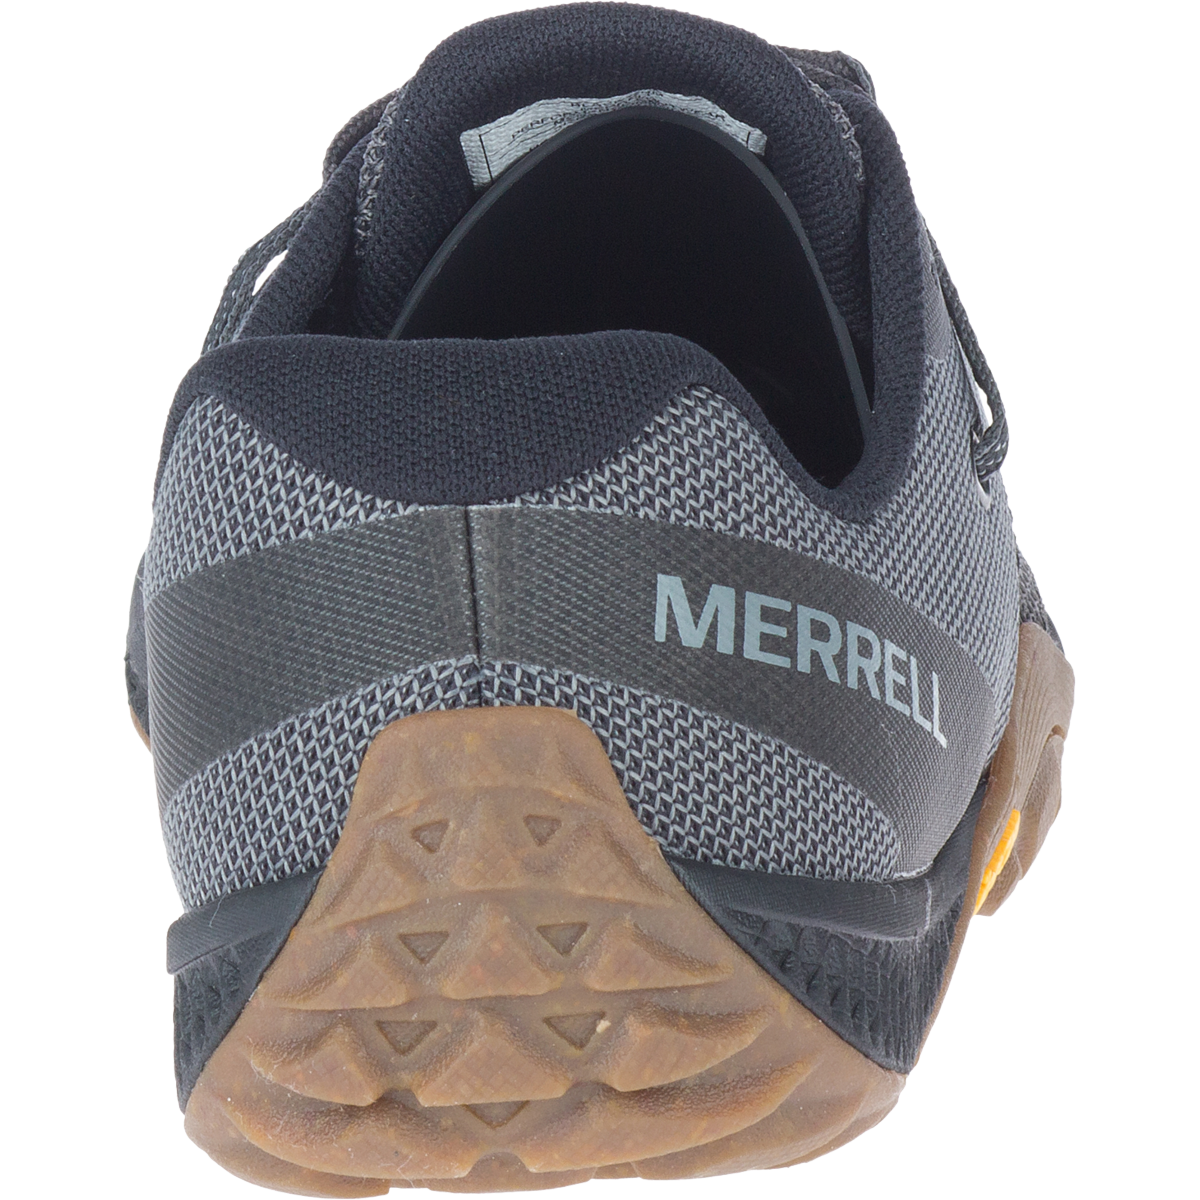 MERRELL Trail Glove 6 Barefoot Shoes Men’s Size 12 - INCENSE J067167 